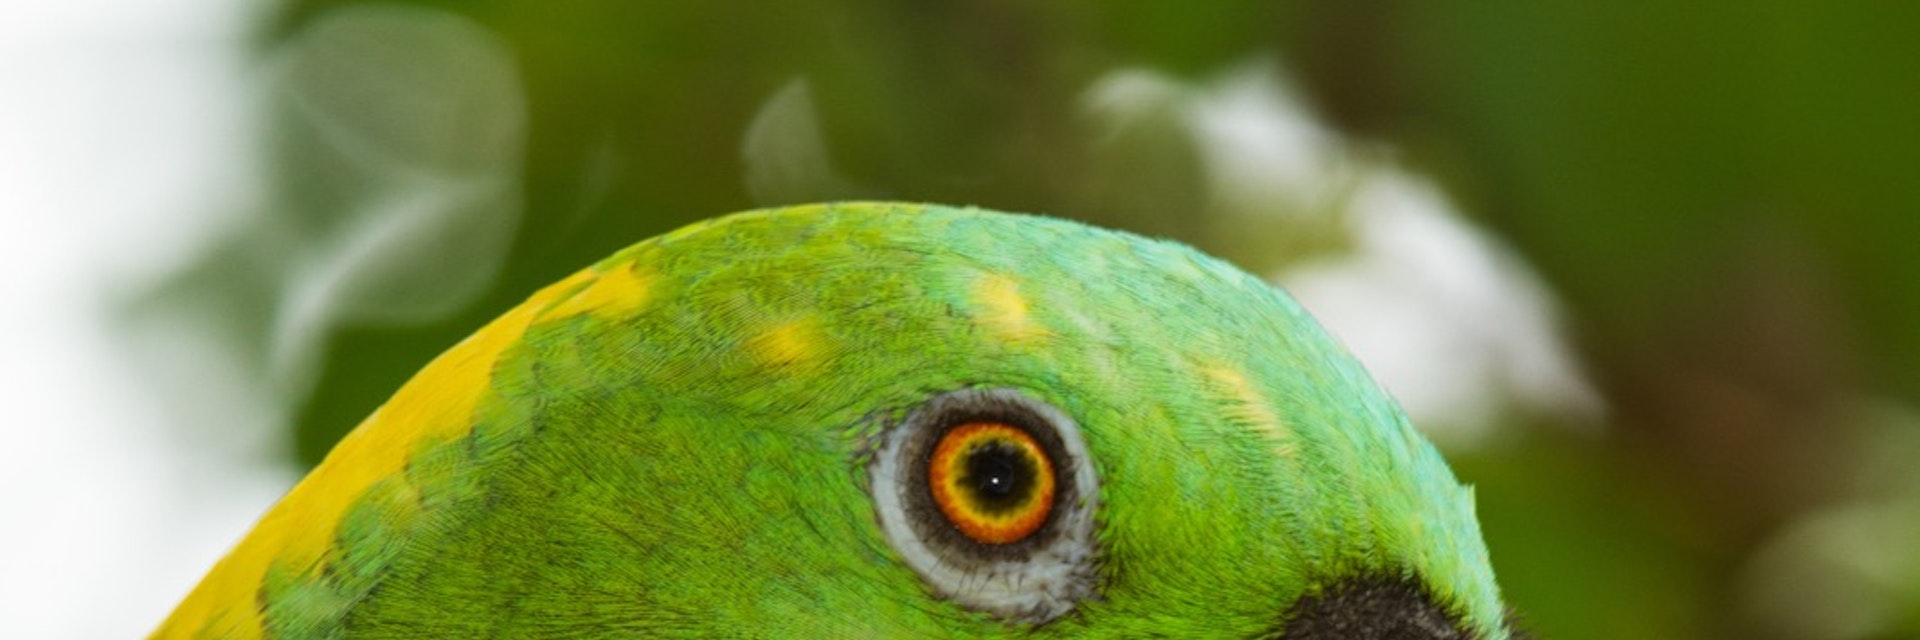 The Yellow-naped Amazon or Yellow-naped Parrot, Amazona auropalliata, ranges from southern Mexico to northern Costa Rica. (Photo by: Jon G. Fuller/VW Pics/UIG via Getty Images)